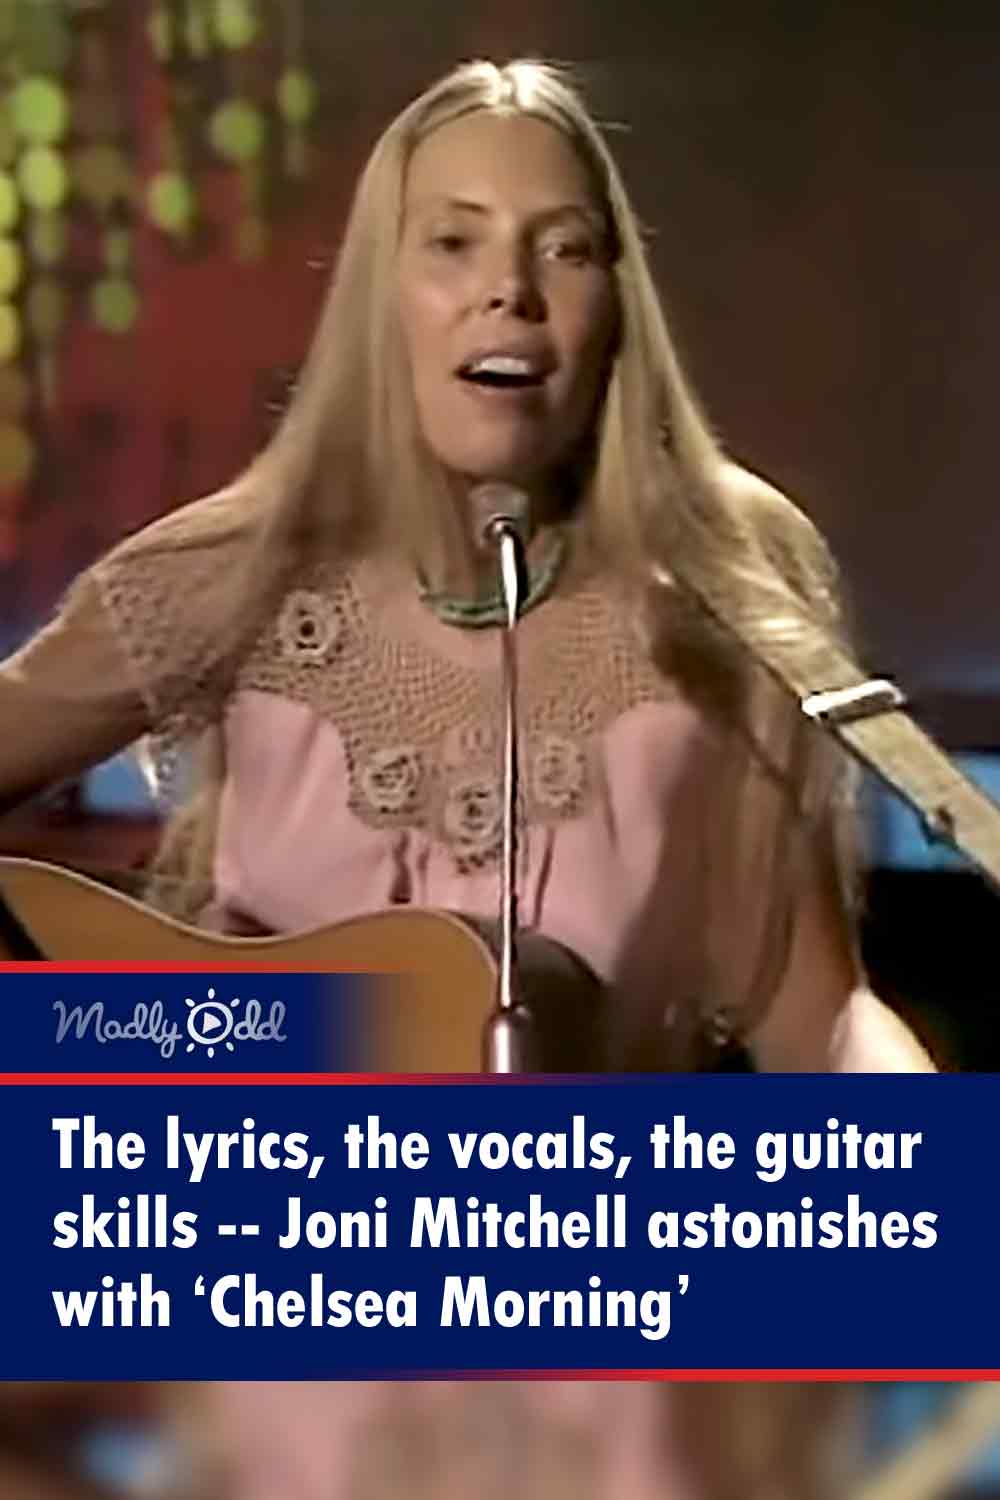 The lyrics, the vocals, the guitar skills -- Joni Mitchell astonishes with ‘Chelsea Morning’